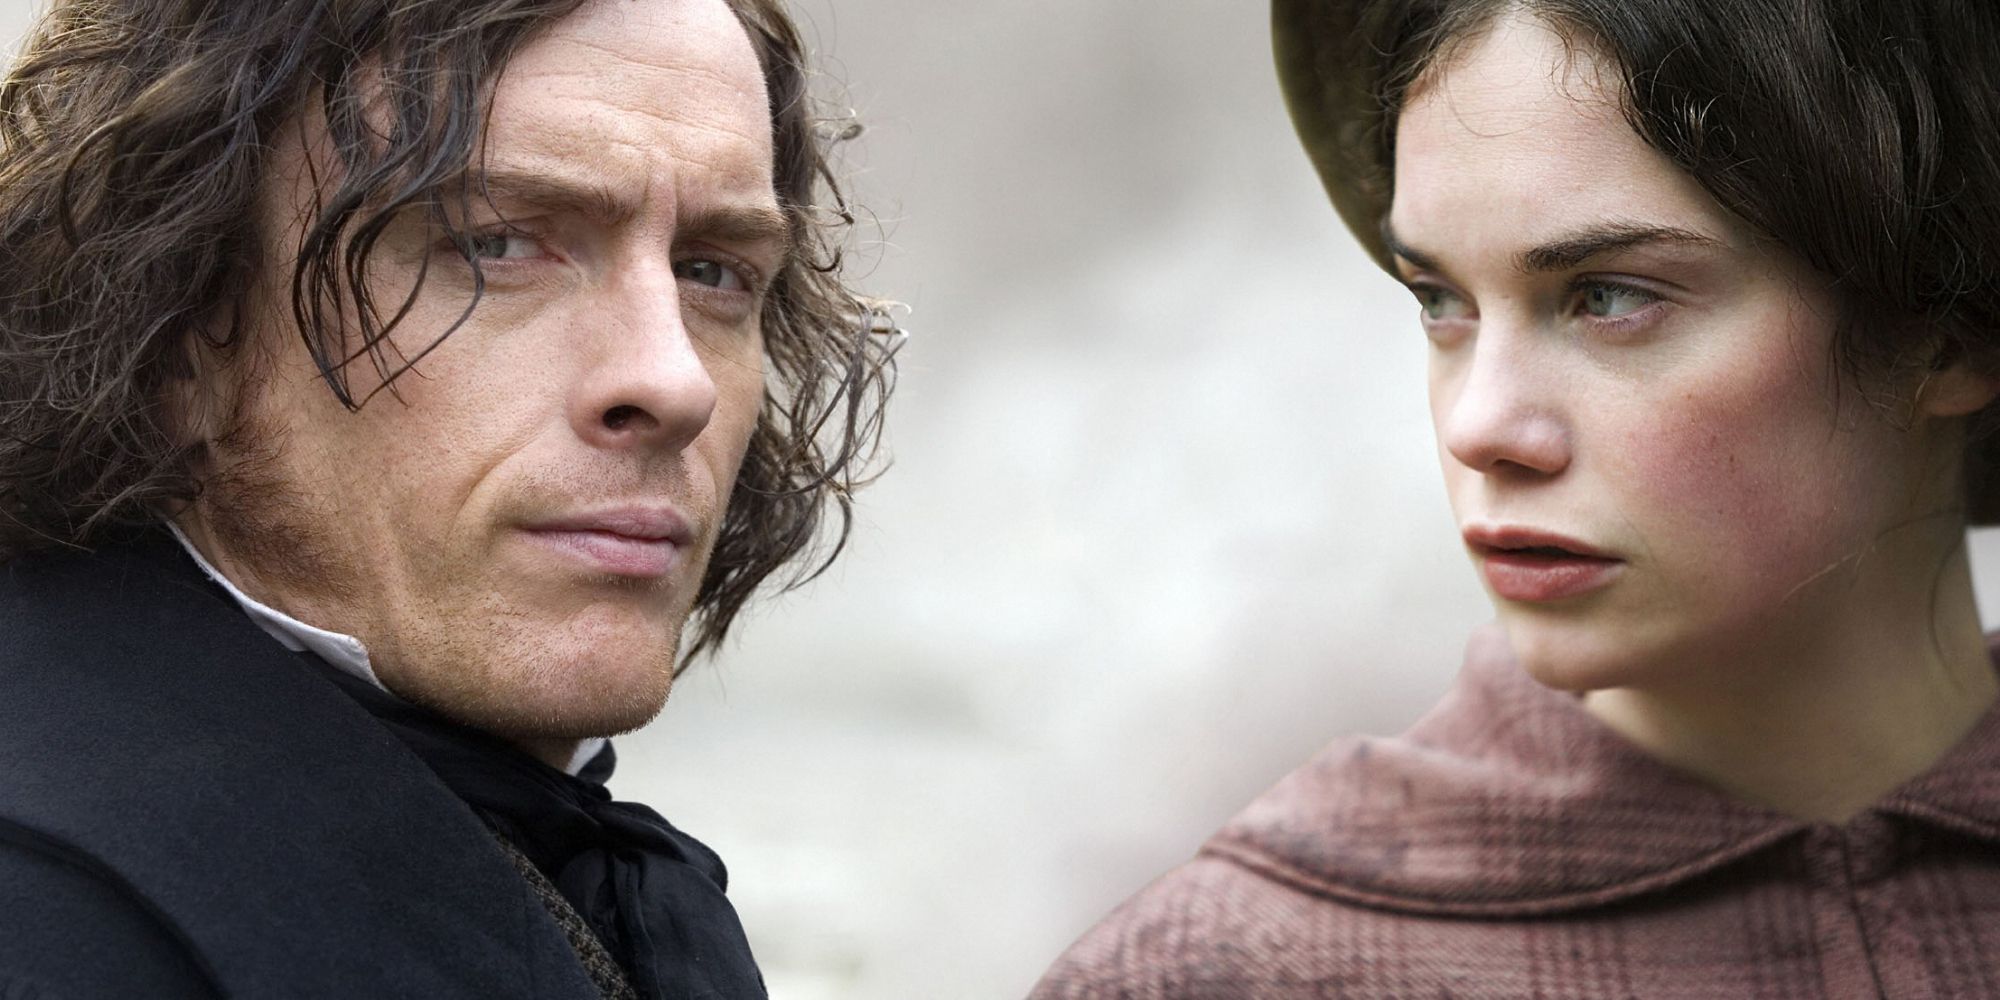 A combined promotional image of Jane Eyre with a close up of Toby Stephens' Rochester on the left and Ruth Wilson's Jane Eyre on the right